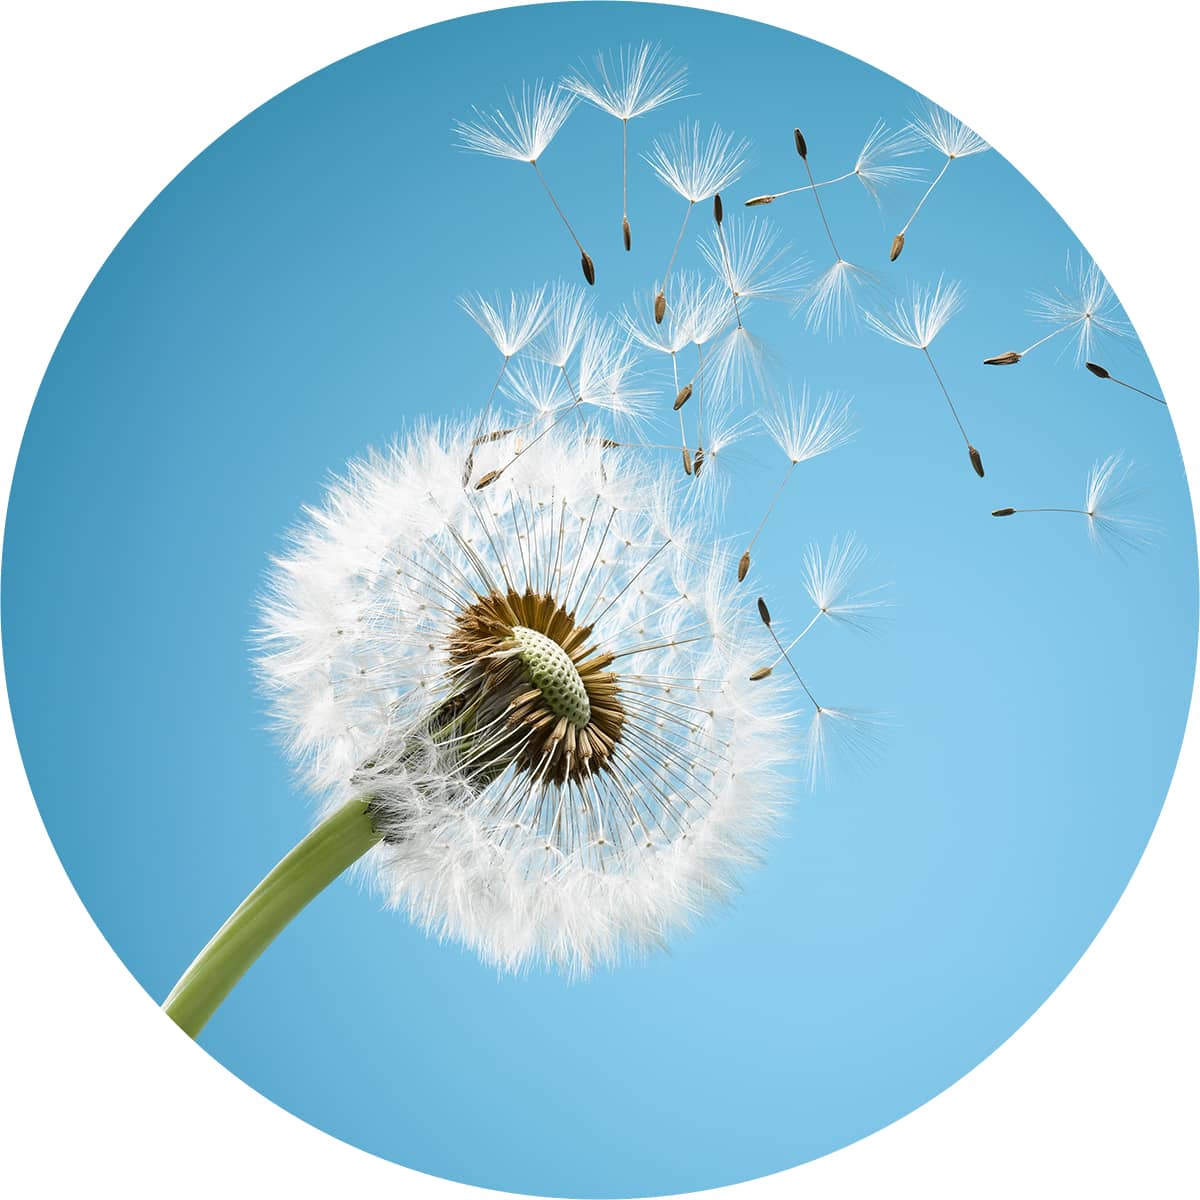 Shop for allergy and asthma relief, showing dandelion seeds blowing off the flower head